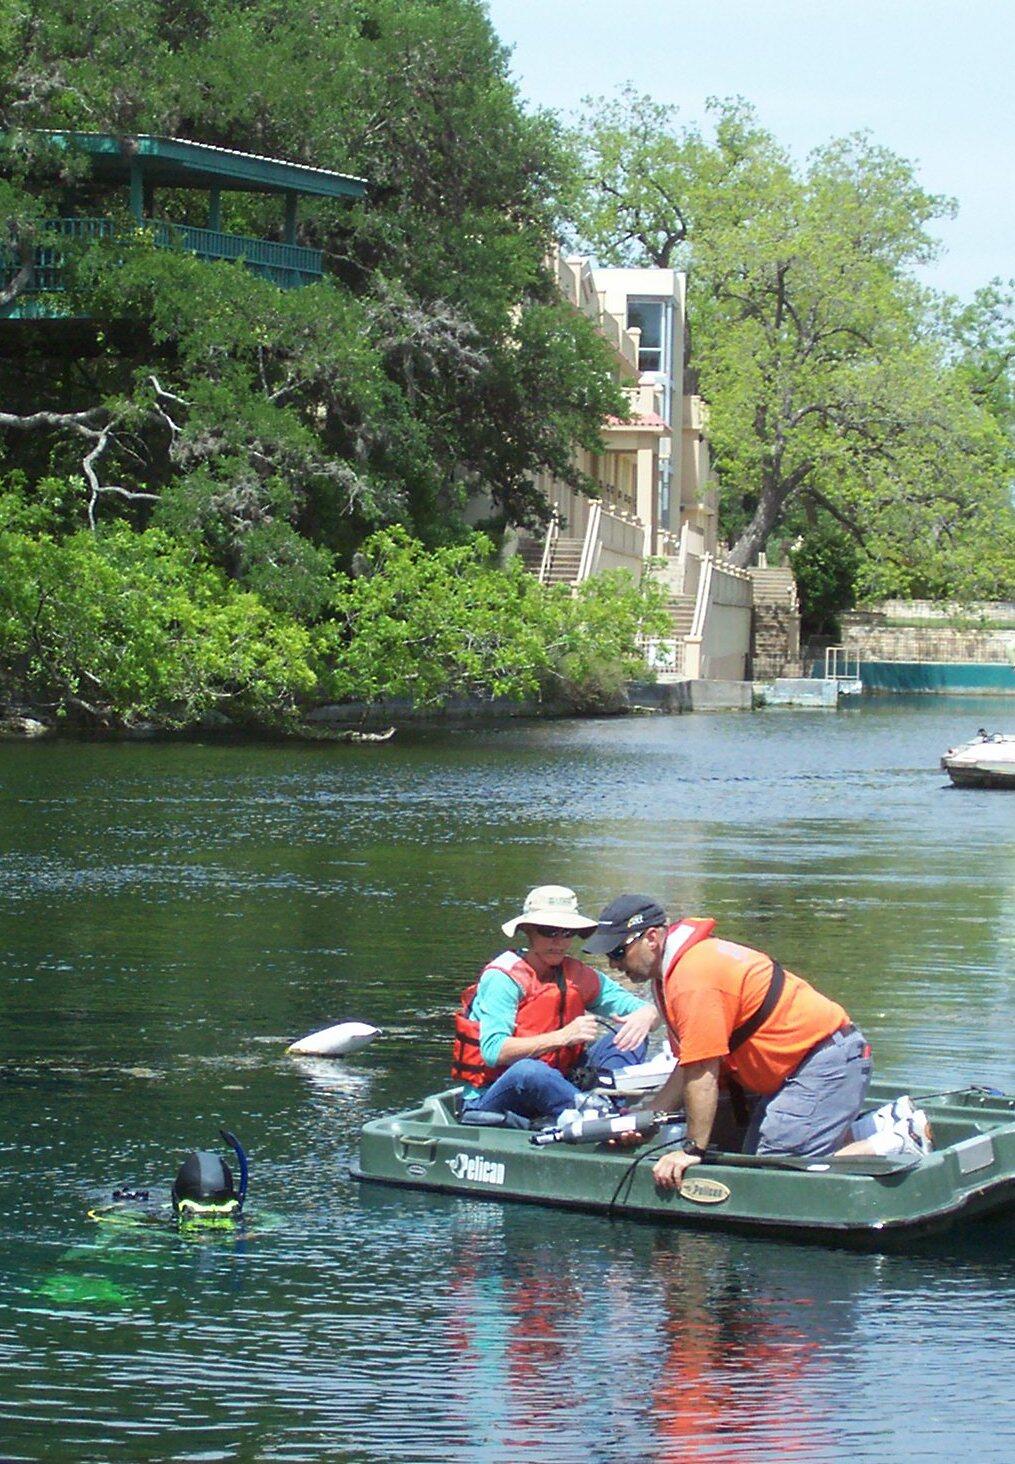 USGS personnel and a diver from Texas State University install a water-quality monitor at Diversion Spring.